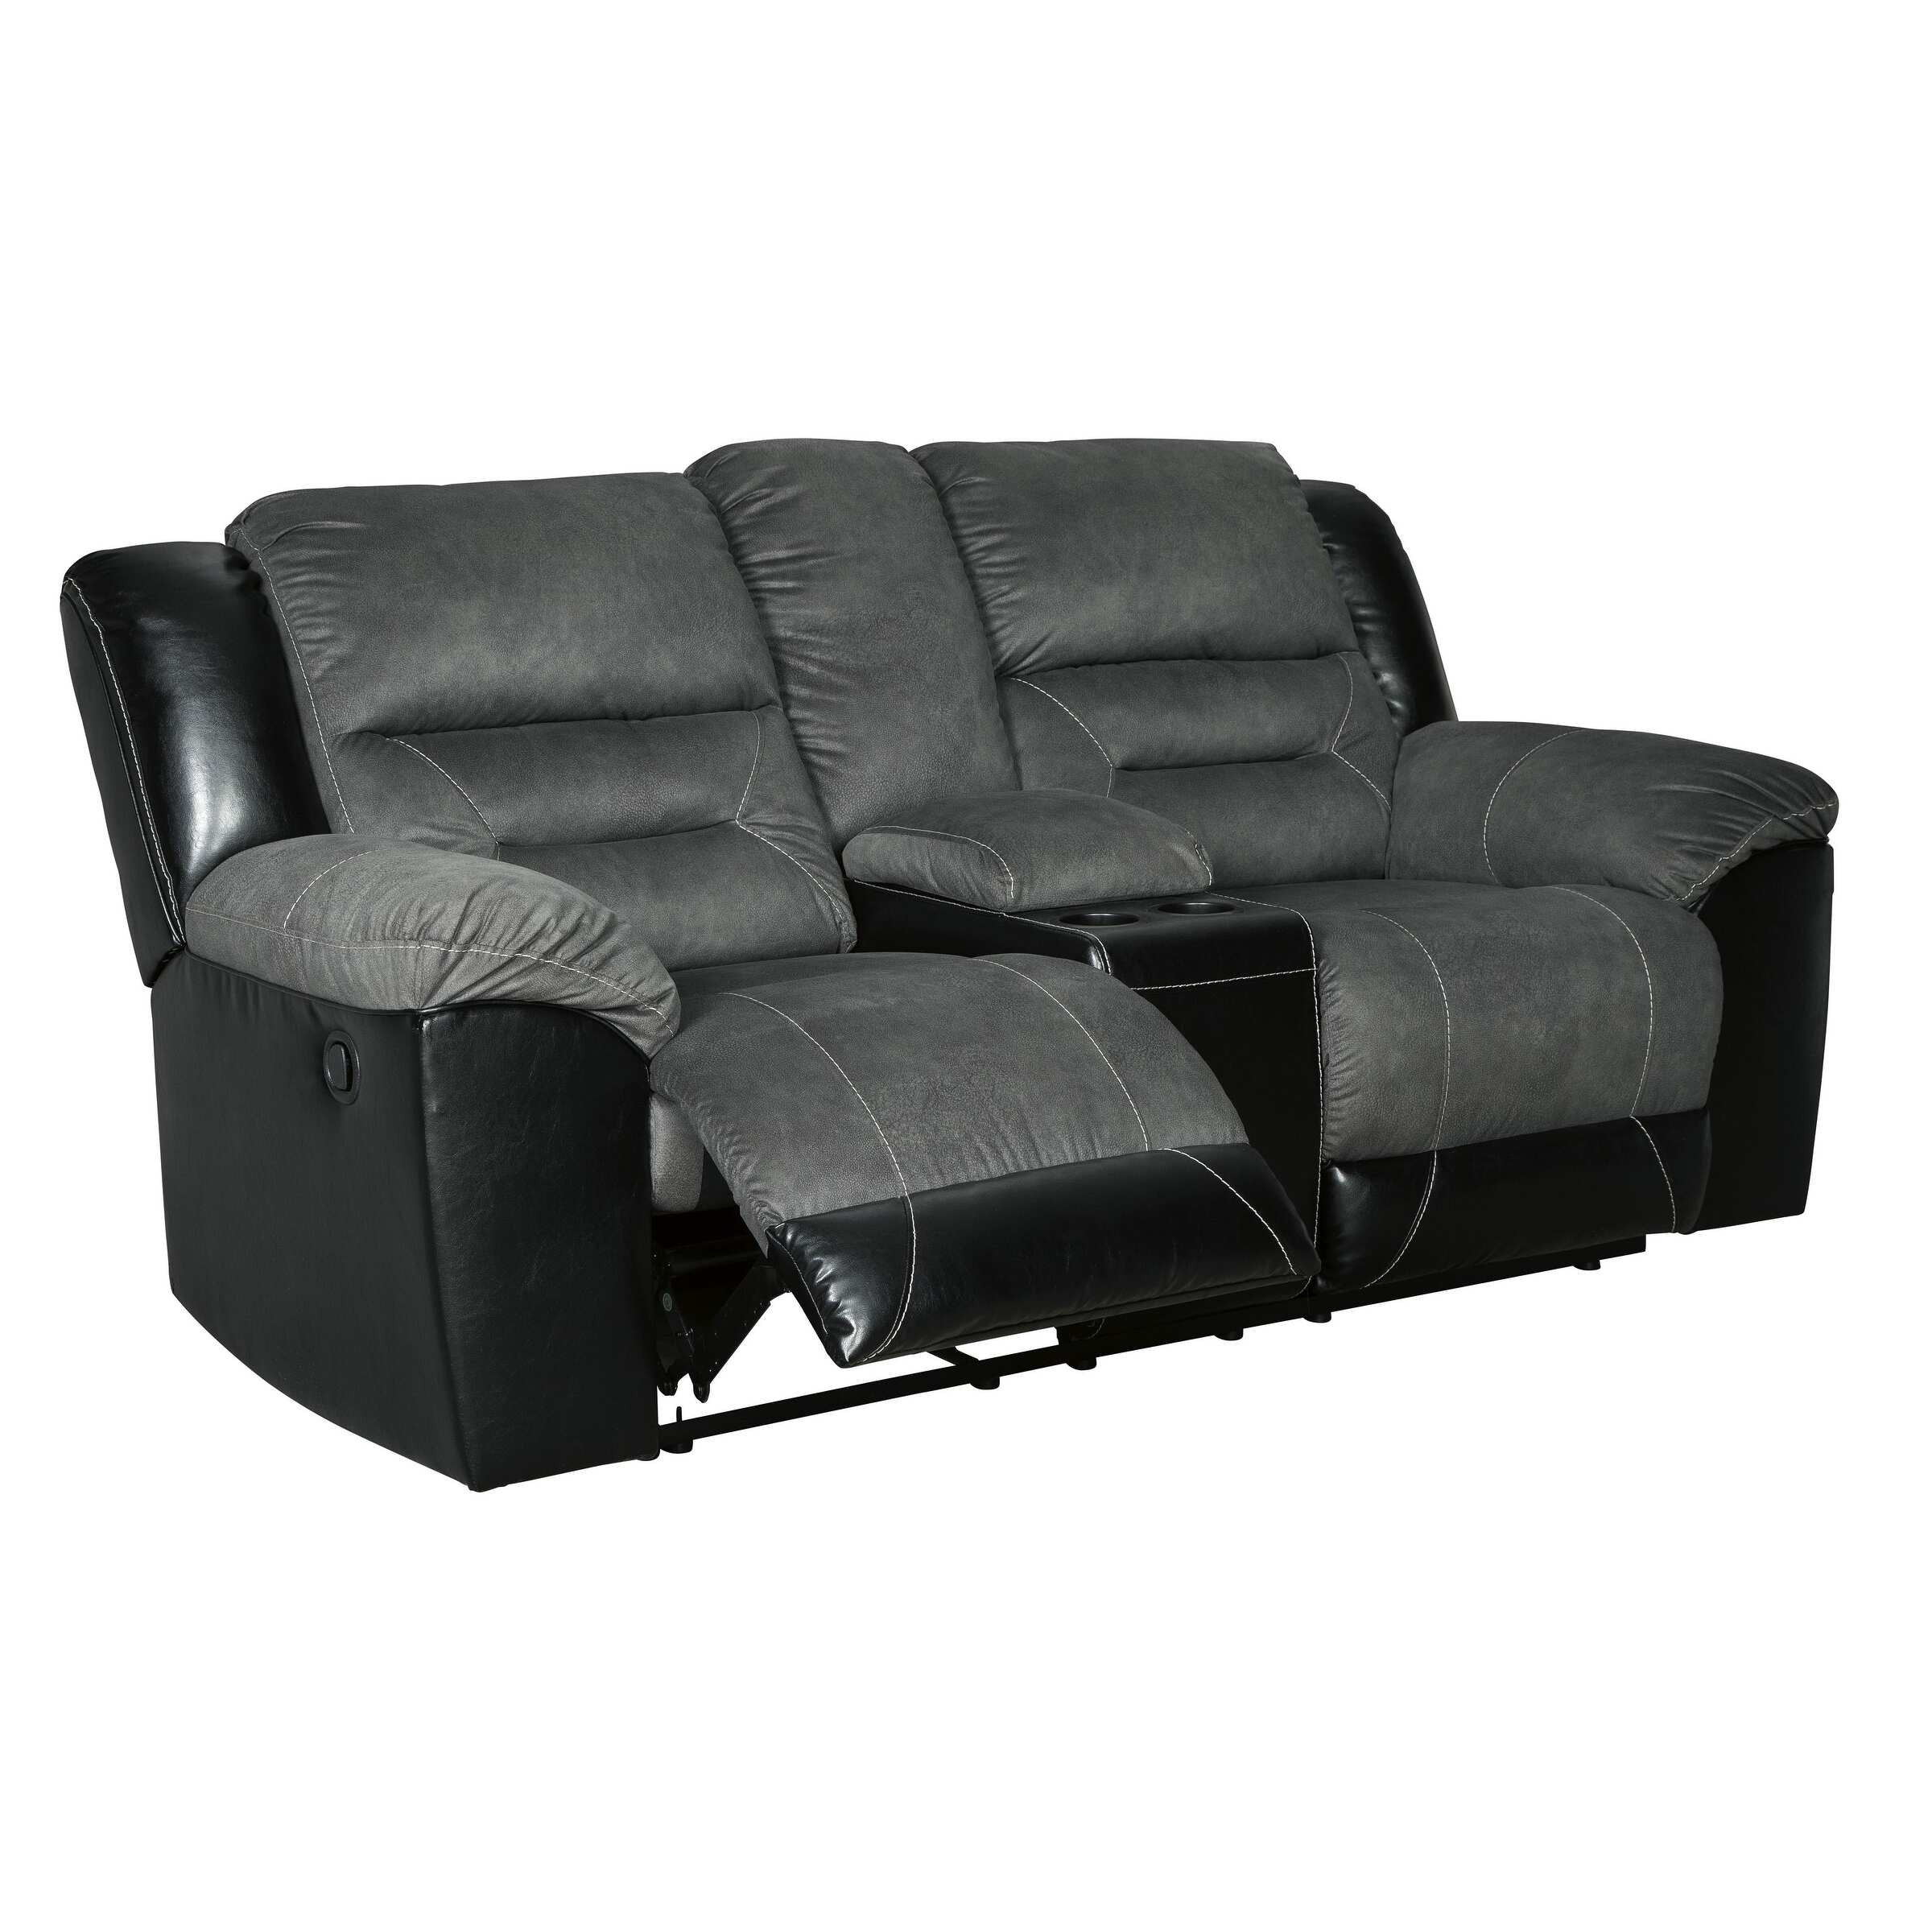 Wooden Dual Recliner Loveseat with Console and Cupholders, Black and Gray